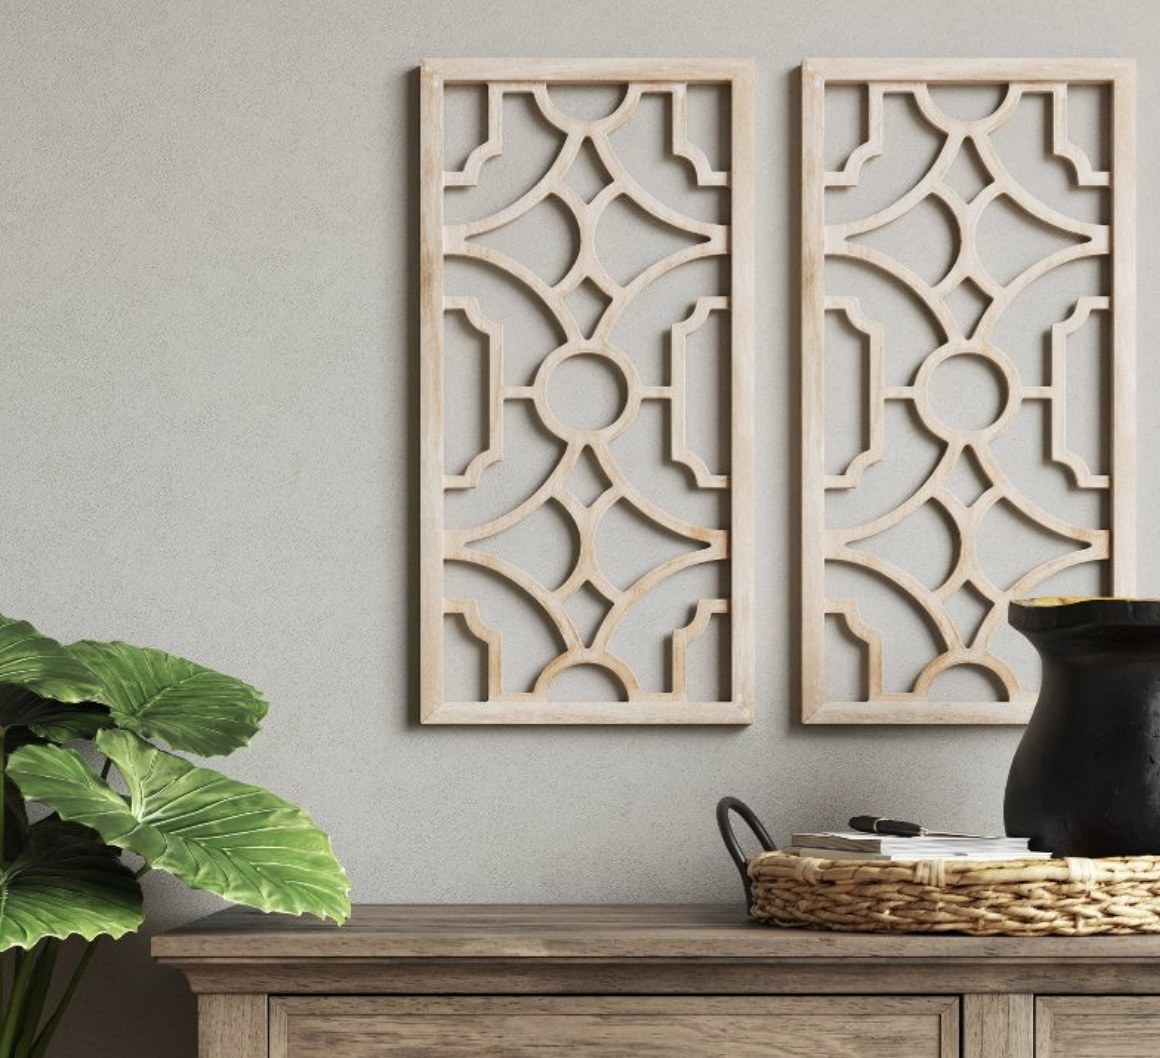 the two wooden lattices hanging on a wall